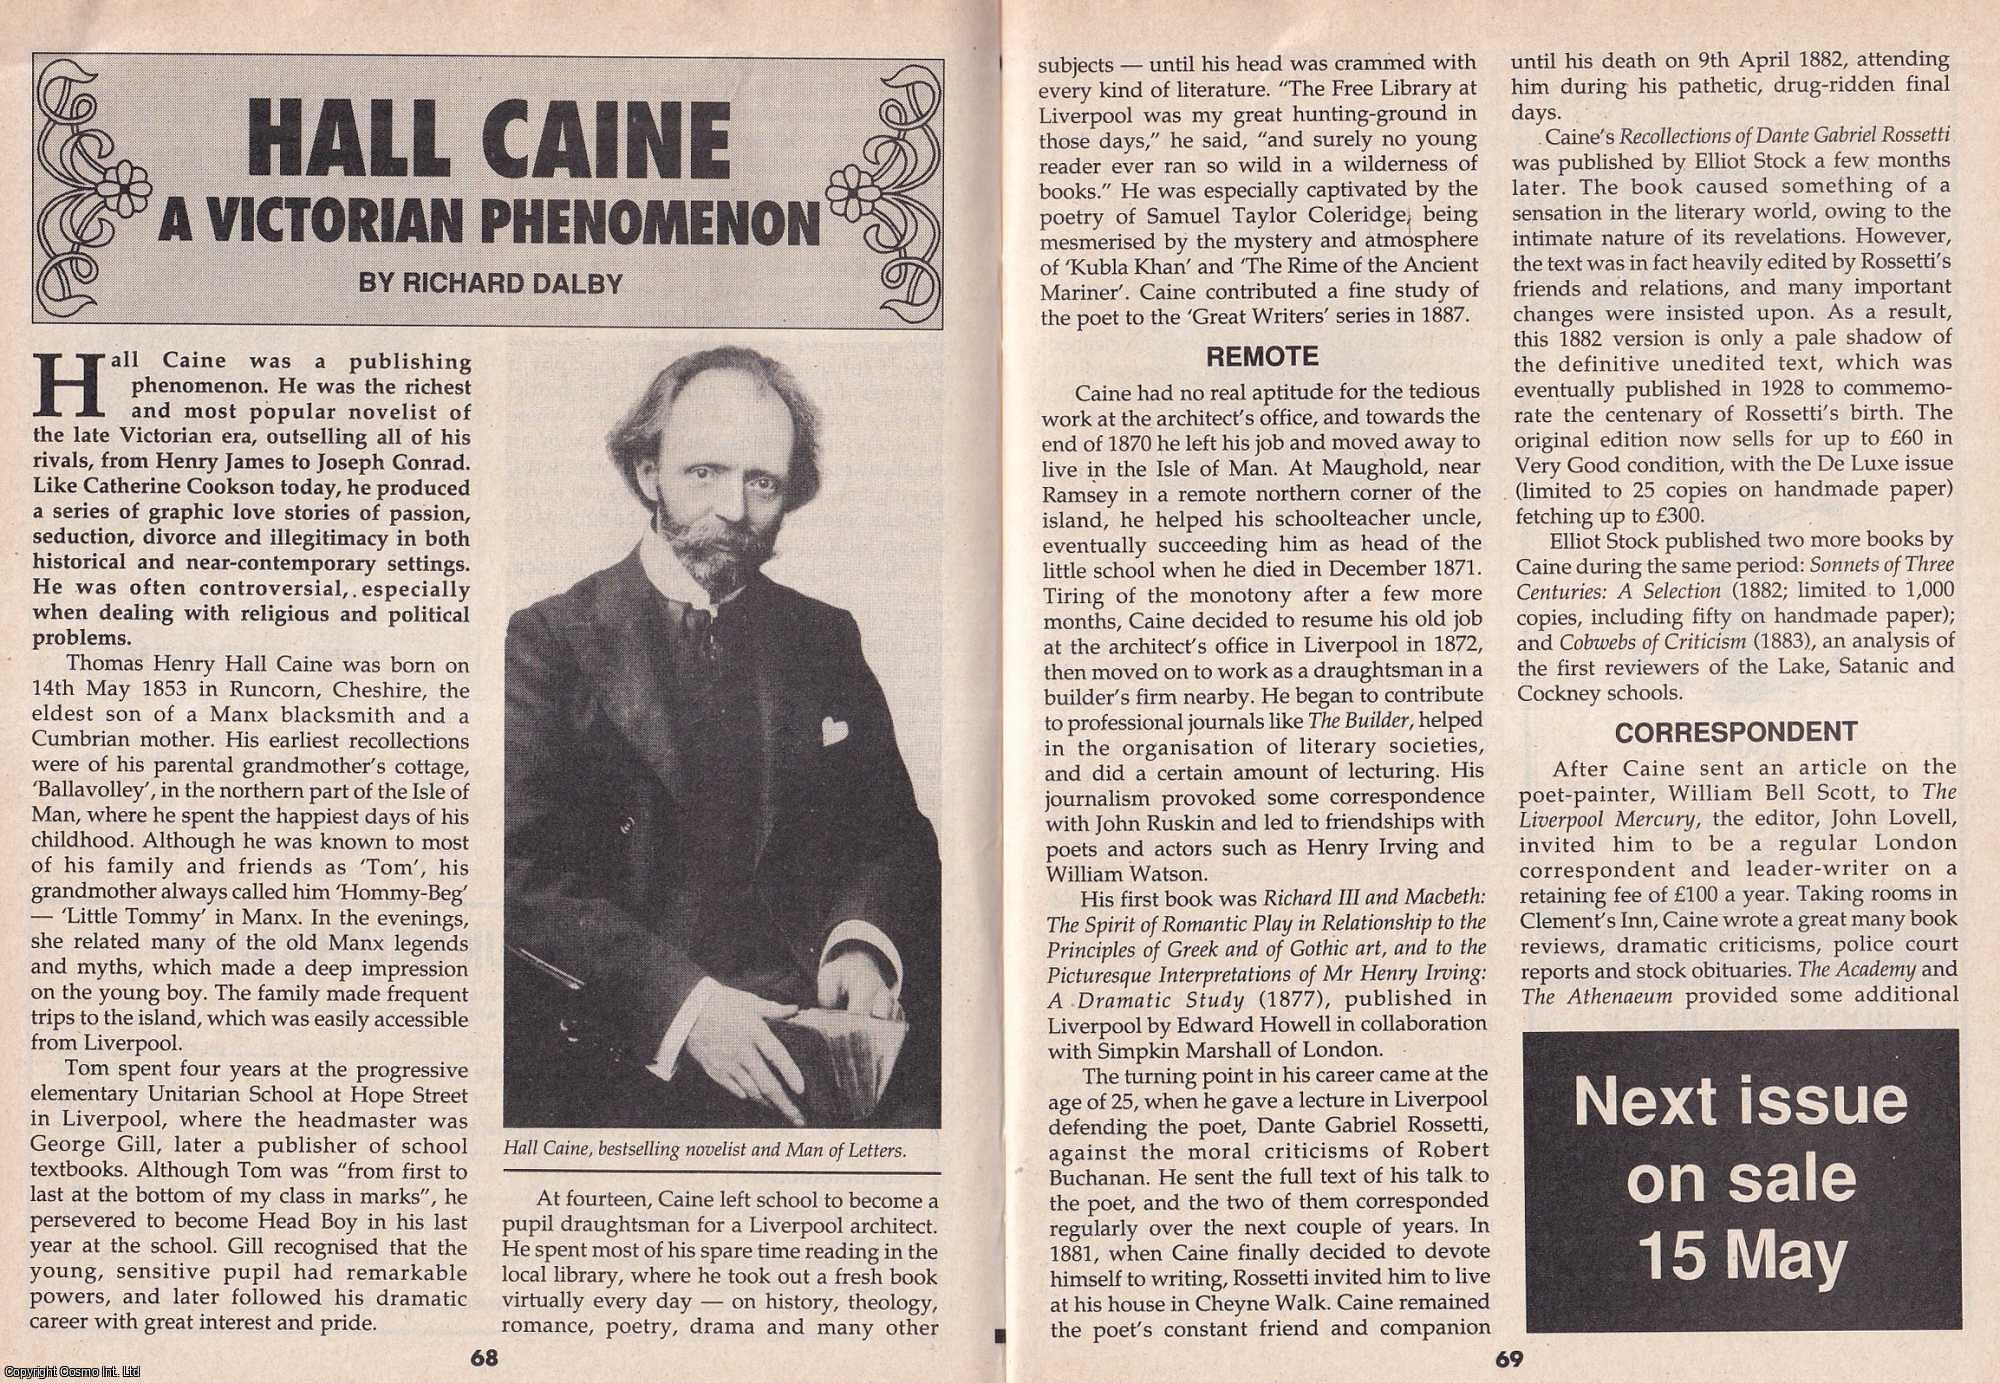 Richard Dalby - Hall Caine : A Victorian Phenomenon. This is an original article separated from an issue of The Book & Magazine Collector publication.